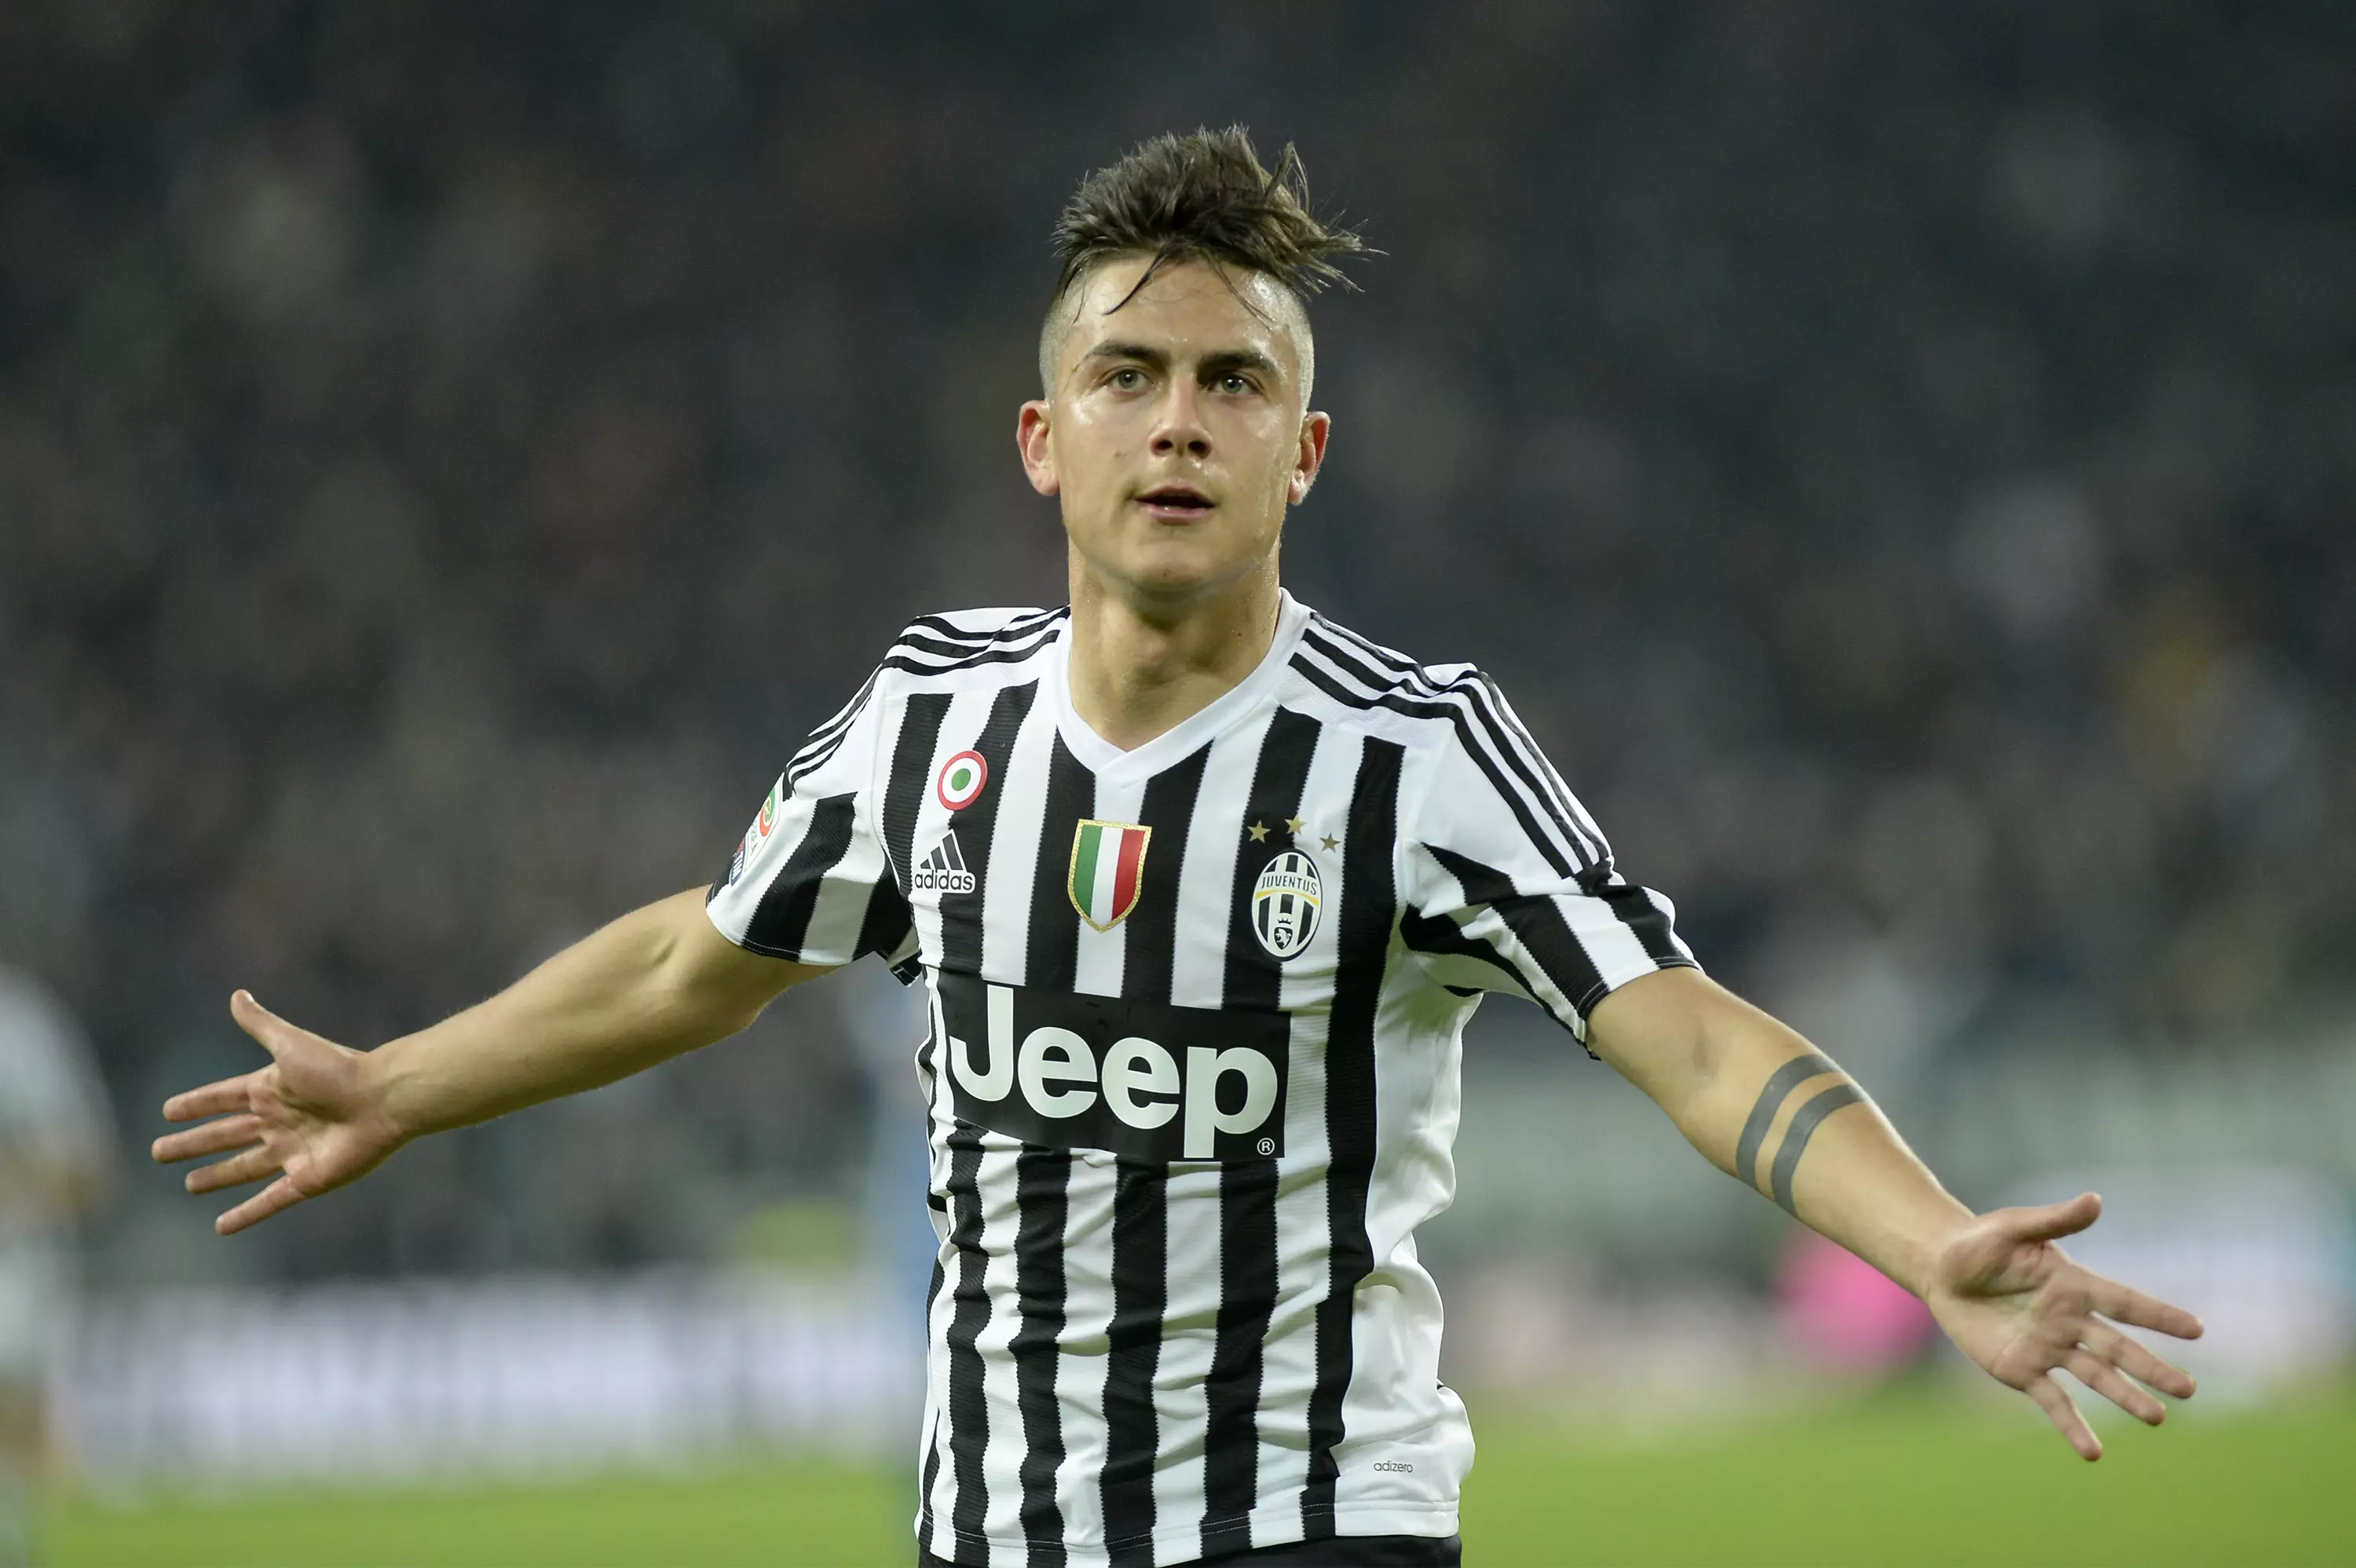 A Look At Juventus' Strikers When Paulo Dybala Was Born